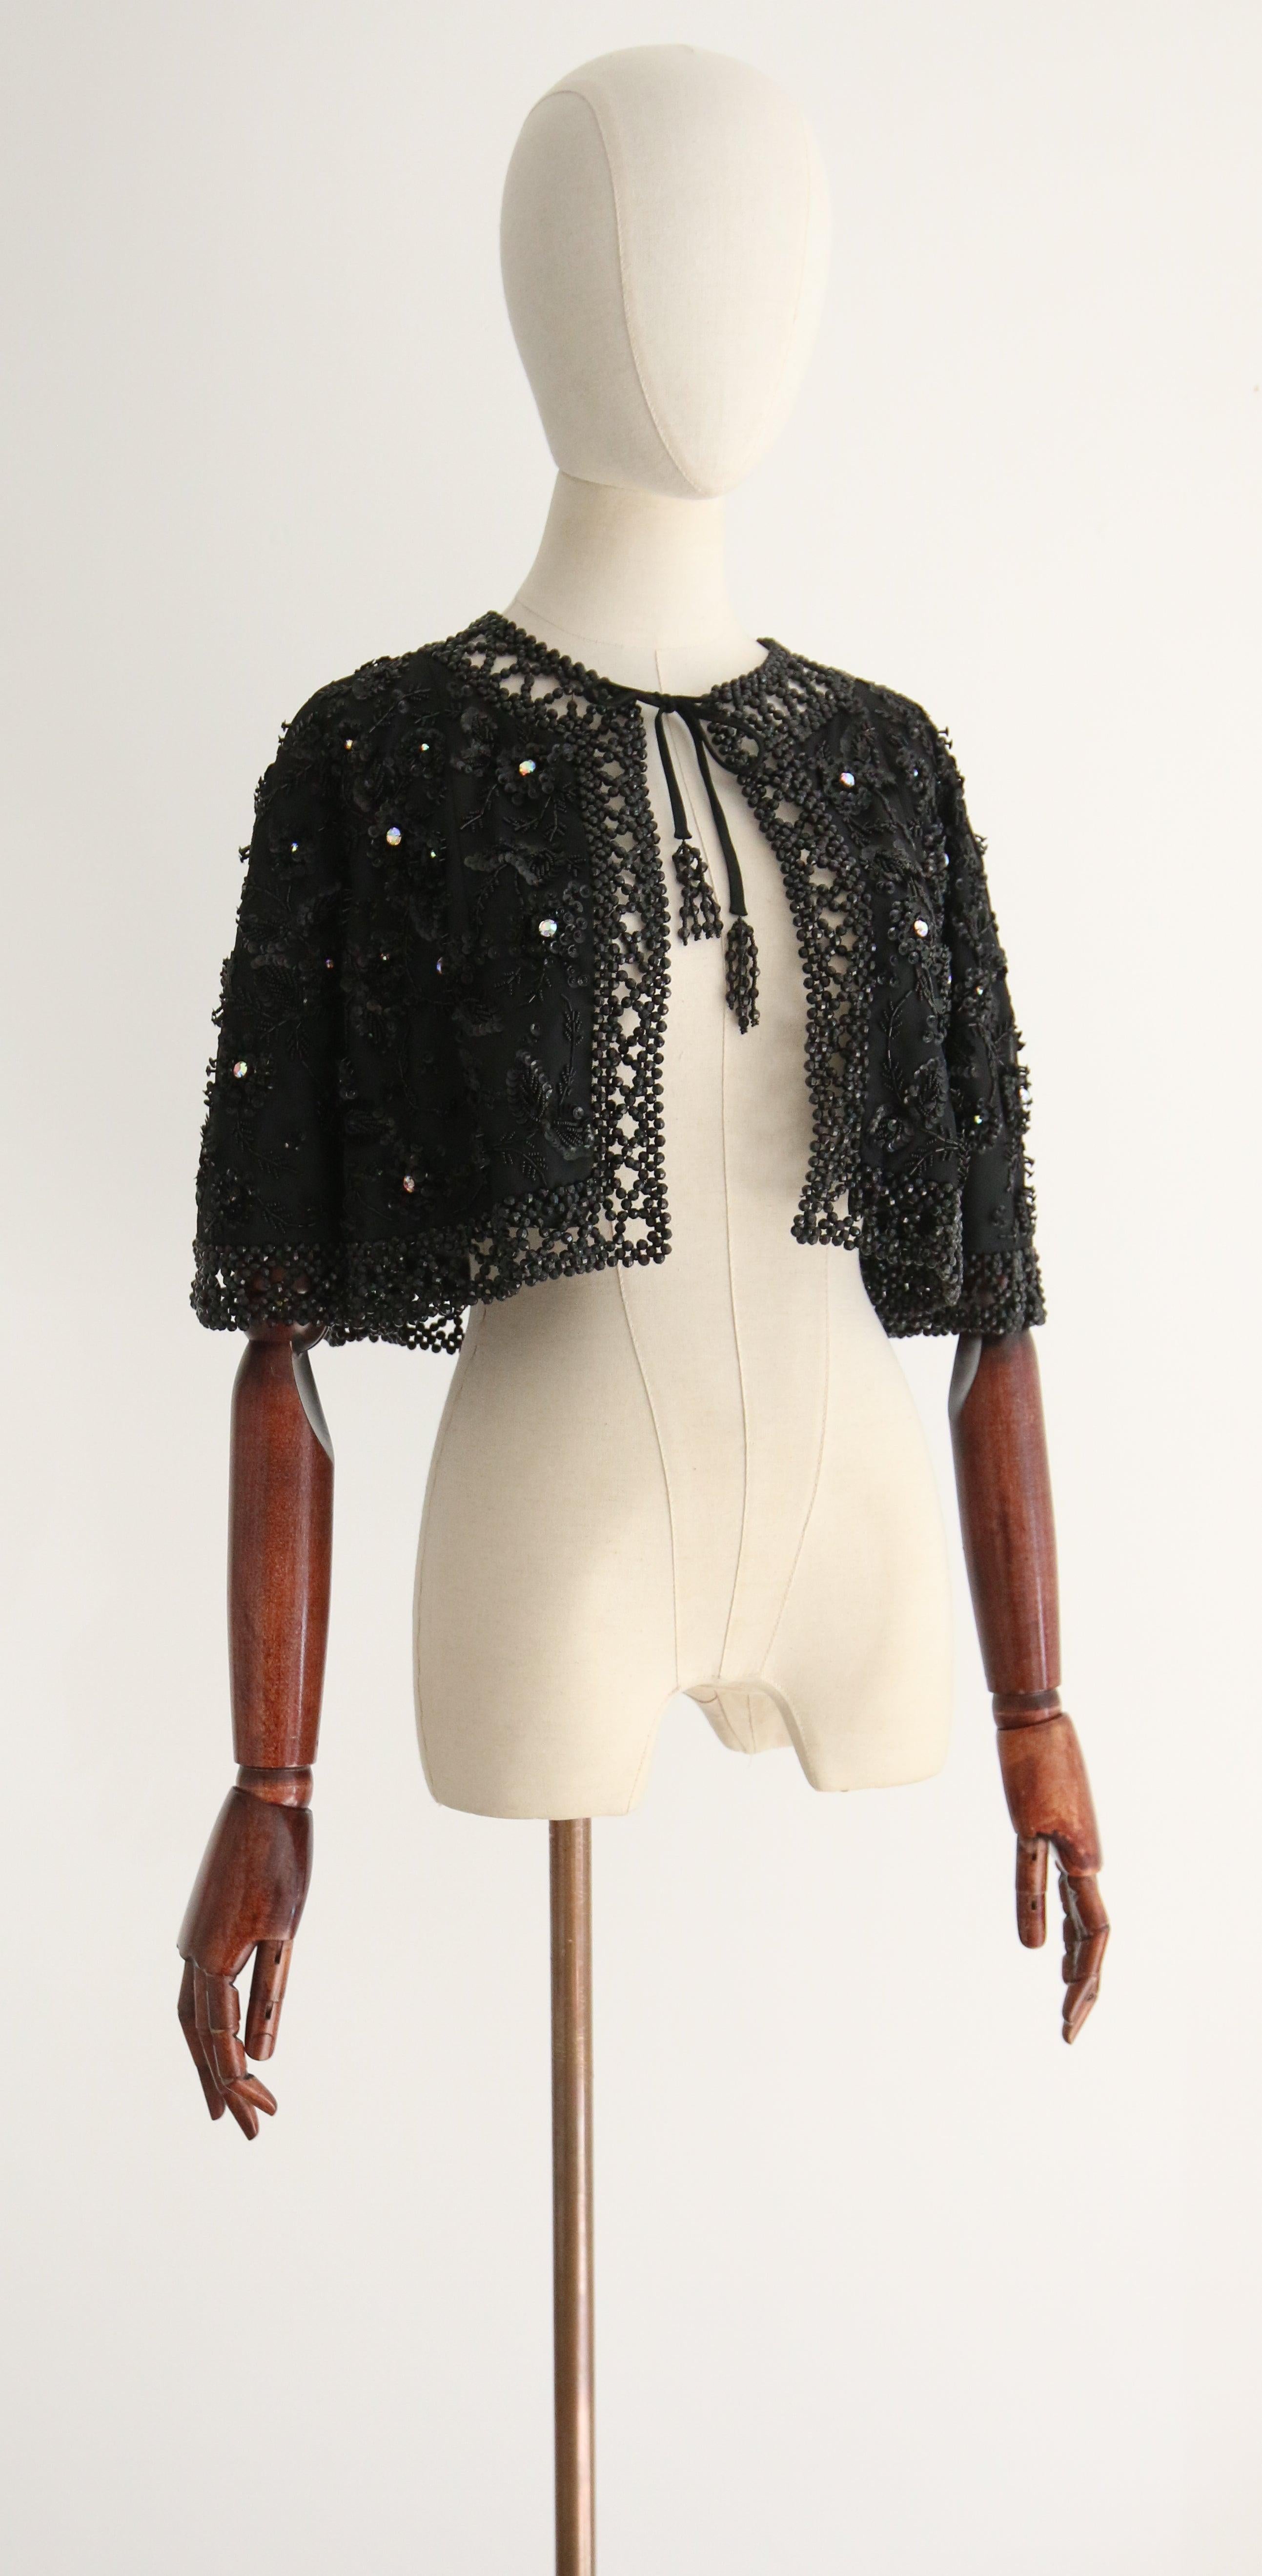 Vintage 1960's Black Beaded and Rhinestone Floral Evening Cape For Sale 2